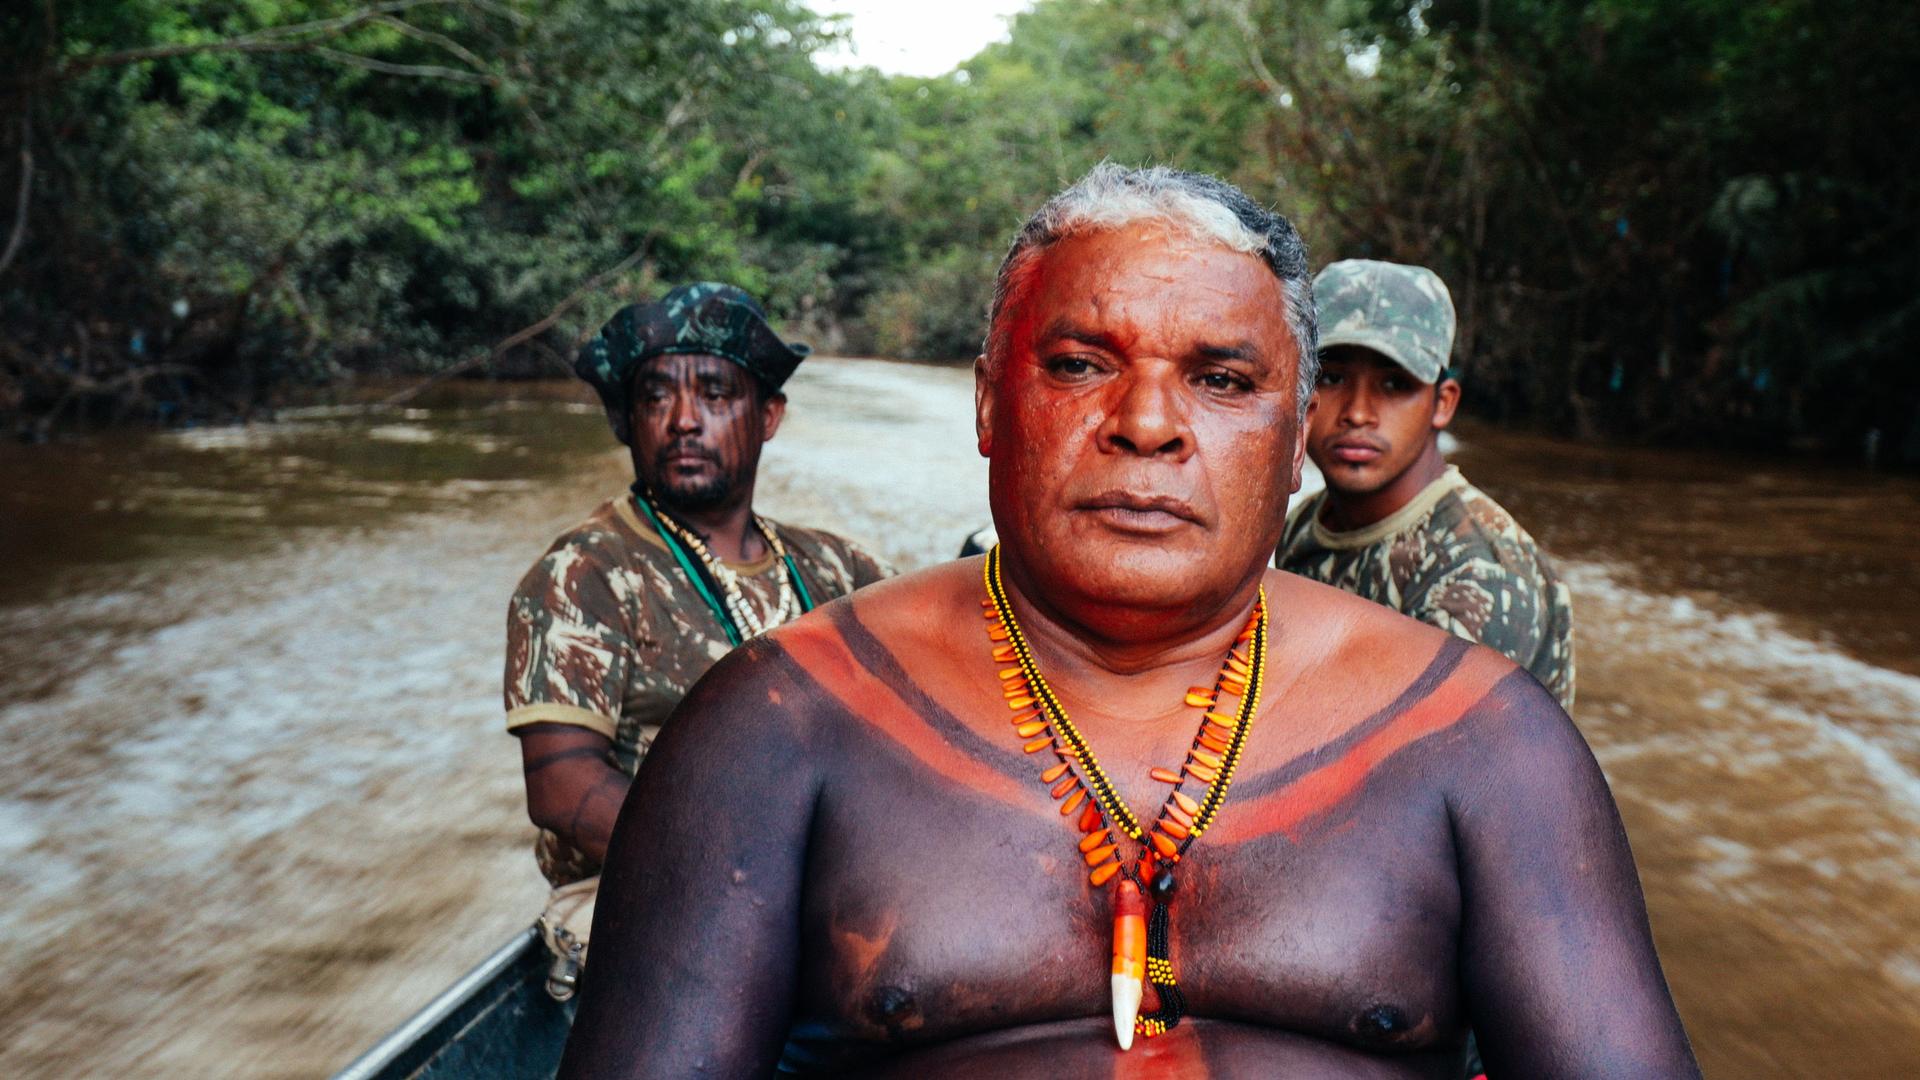 An Indigenous Man wearing beads, his chest decorated with red and black paint, sits in a speedboat. There are two men in camouflage behind behind him.